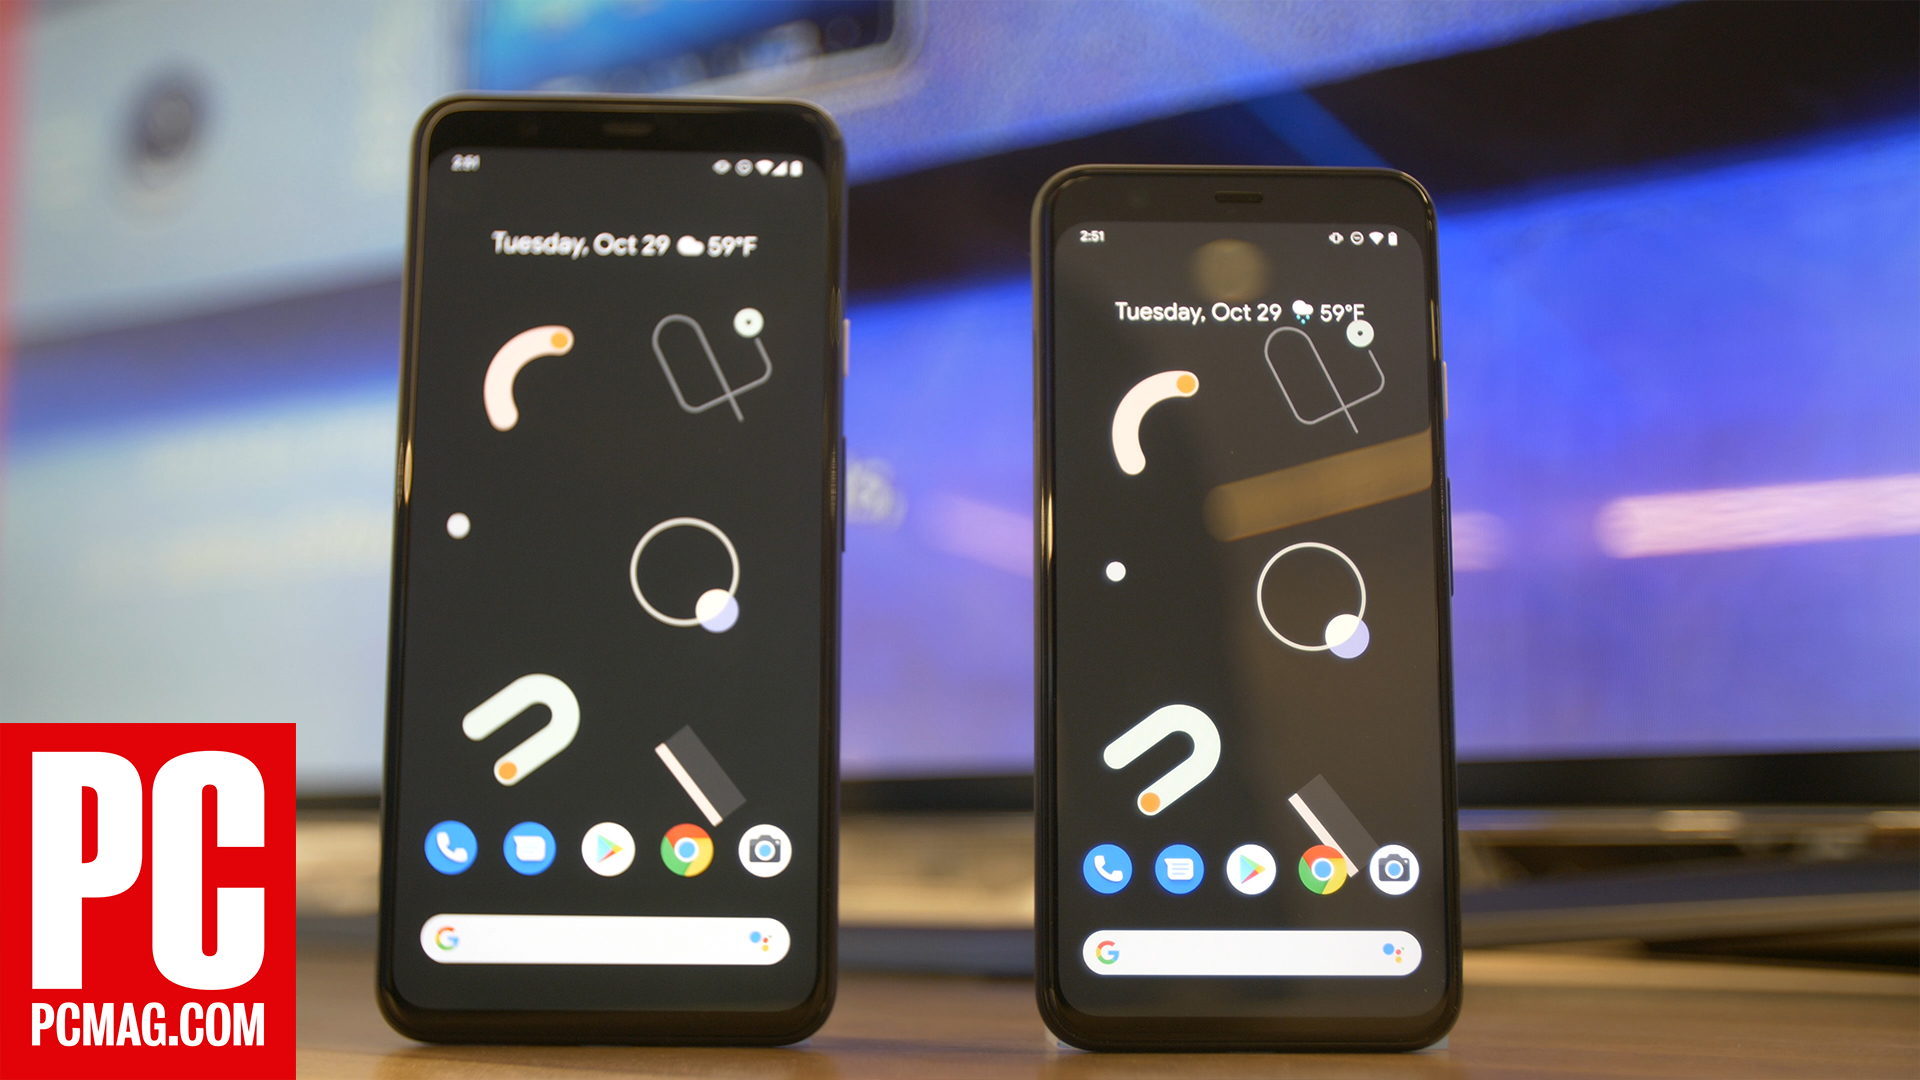 Google Pixel 4 and 4 XL Review